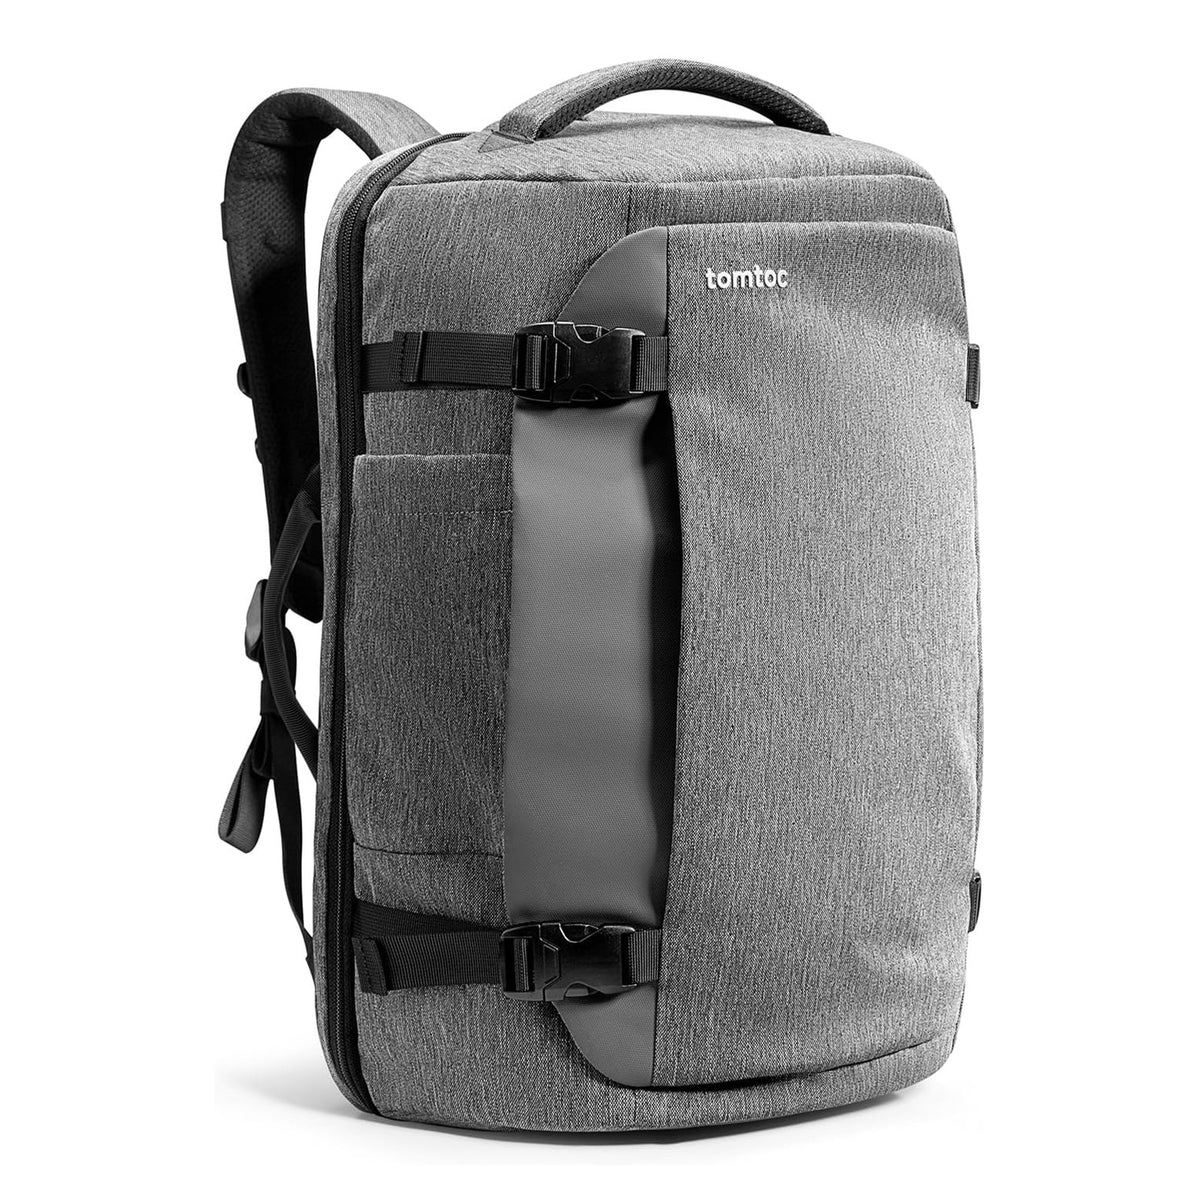 tomtoc 17 Inch Travel Laptop / Backpack Laptop - Gray